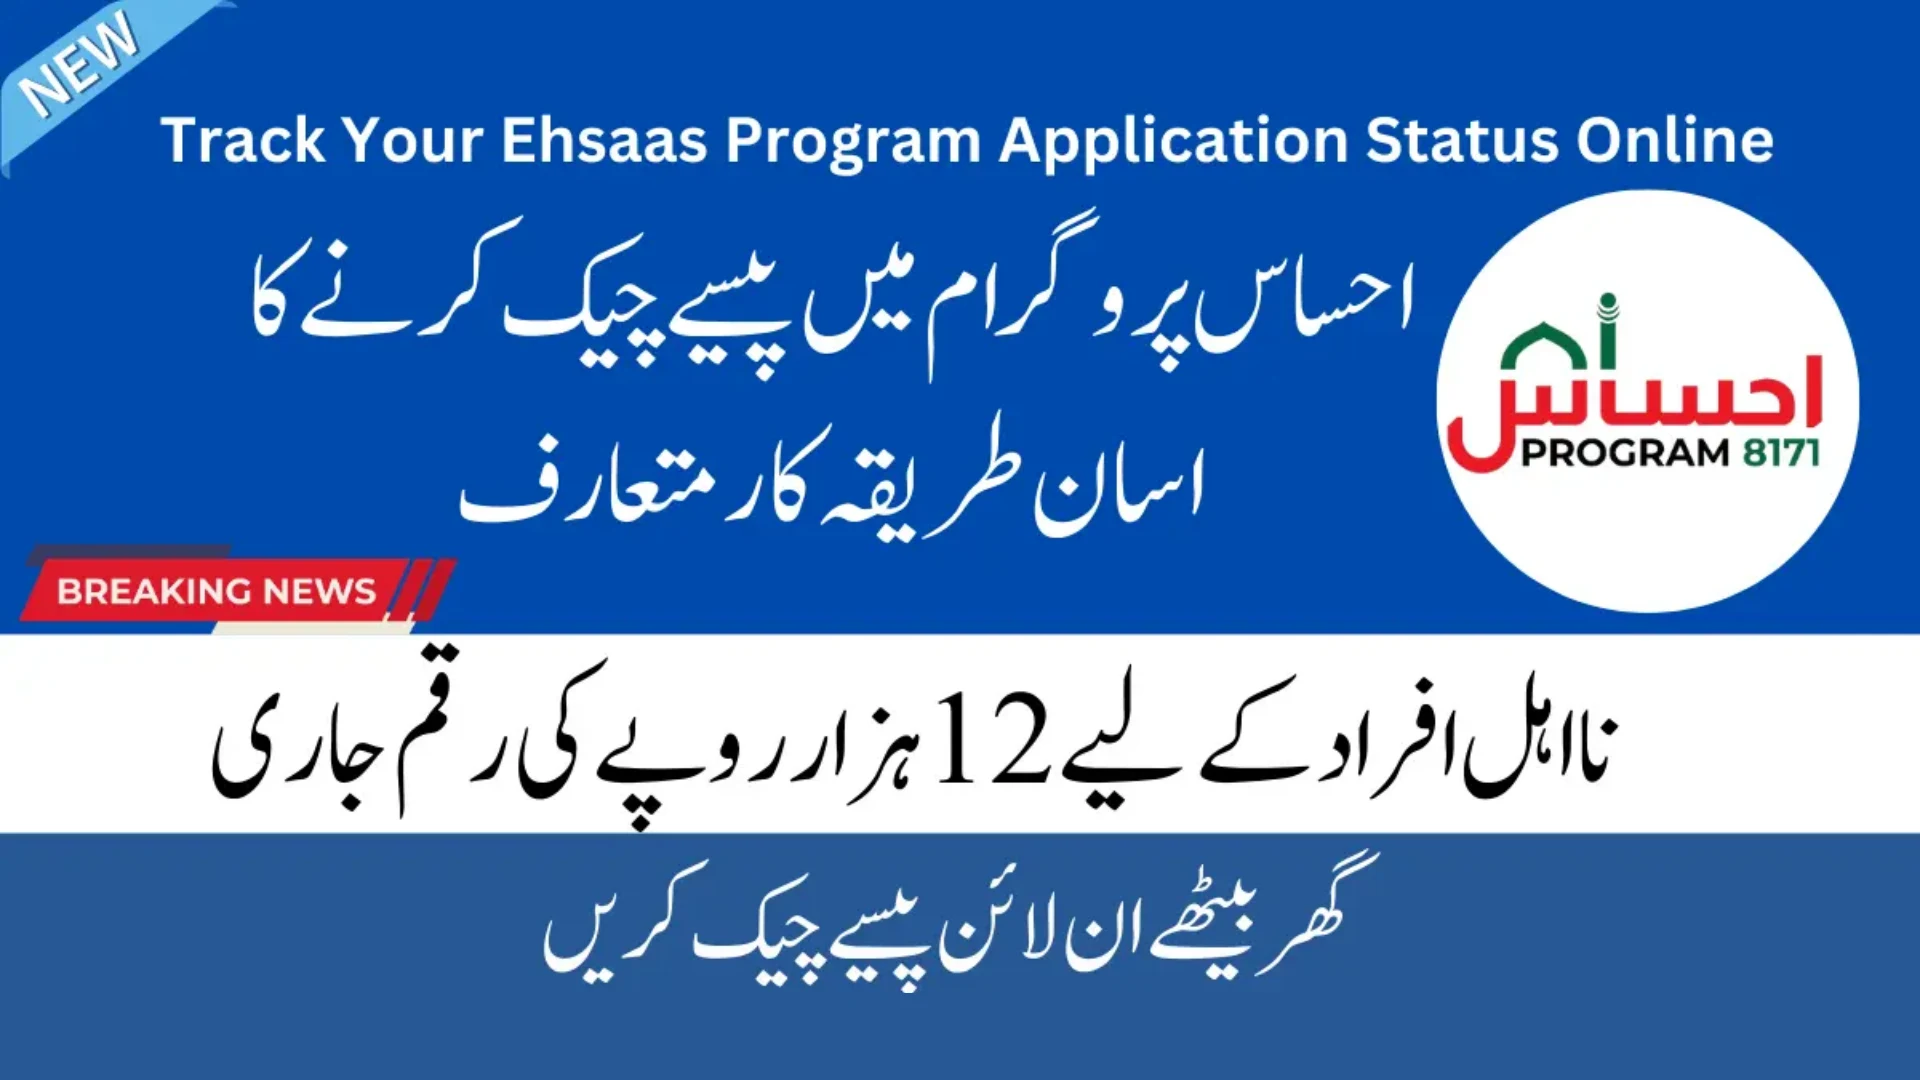 How to Apply for Ehsaas tracking and who can apply